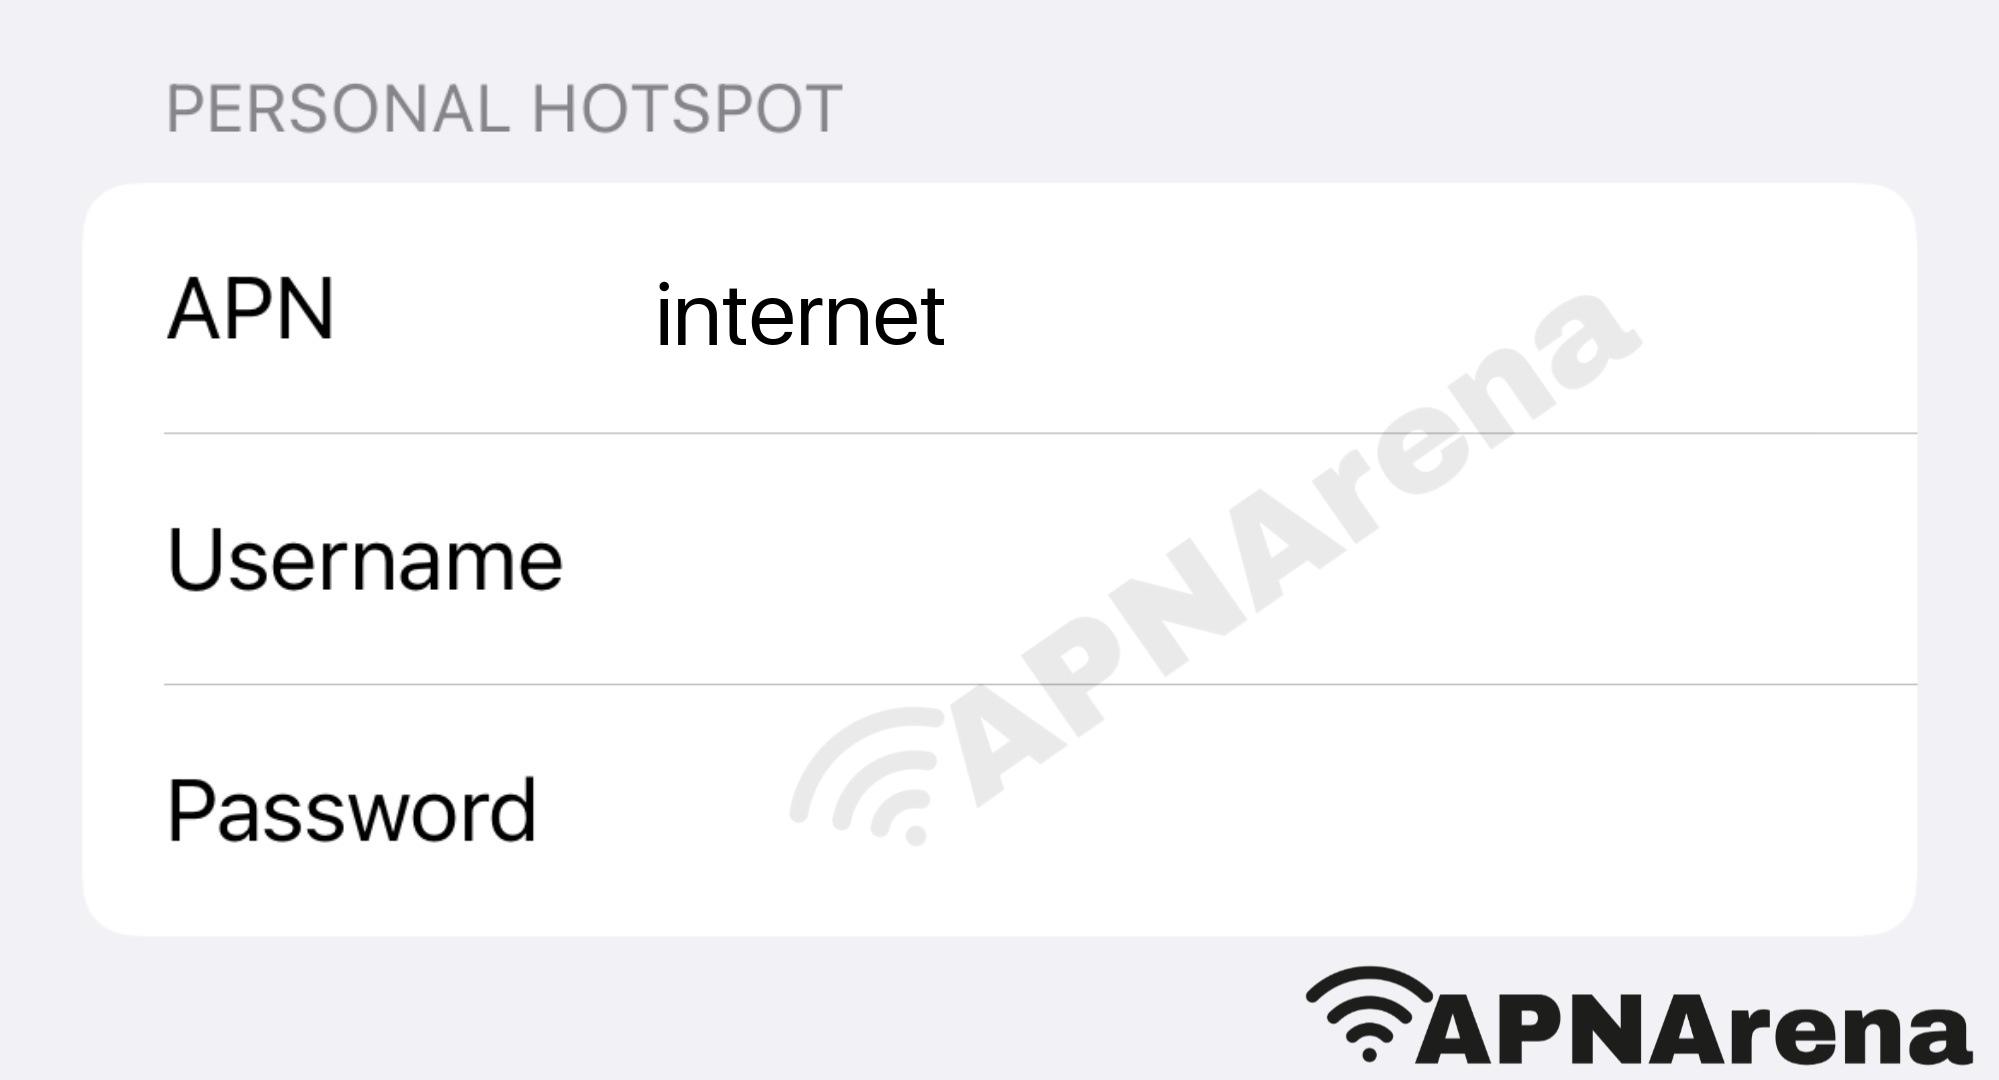 OTR Mobile Personal Hotspot Settings for iPhone